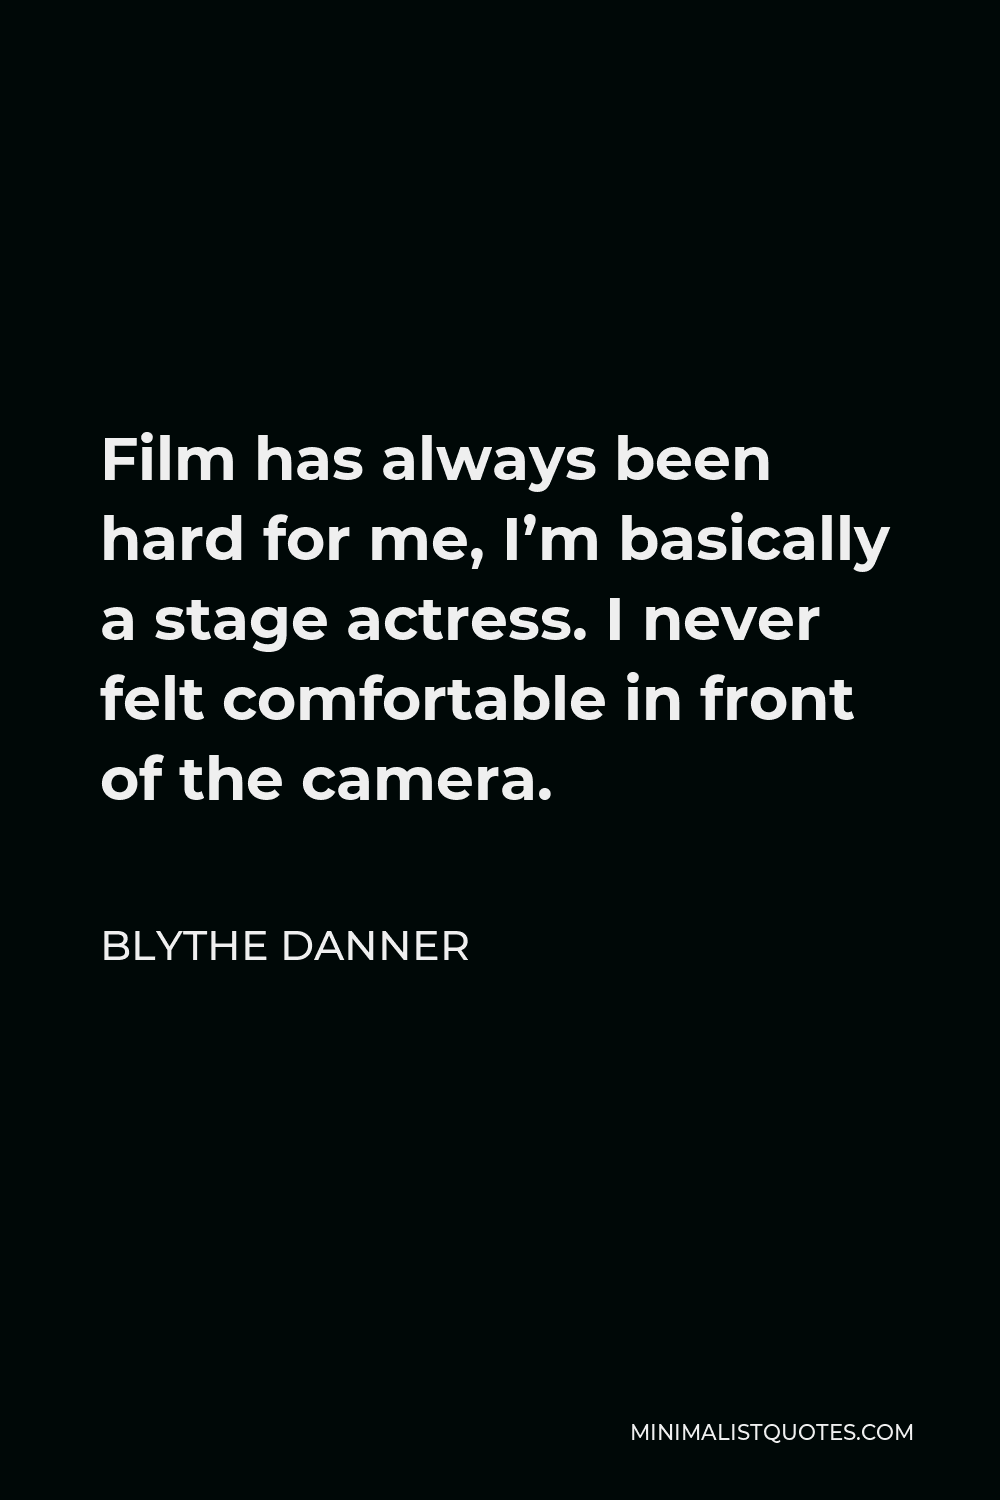 Blythe Danner Quote - Film has always been hard for me, I’m basically a stage actress. I never felt comfortable in front of the camera.